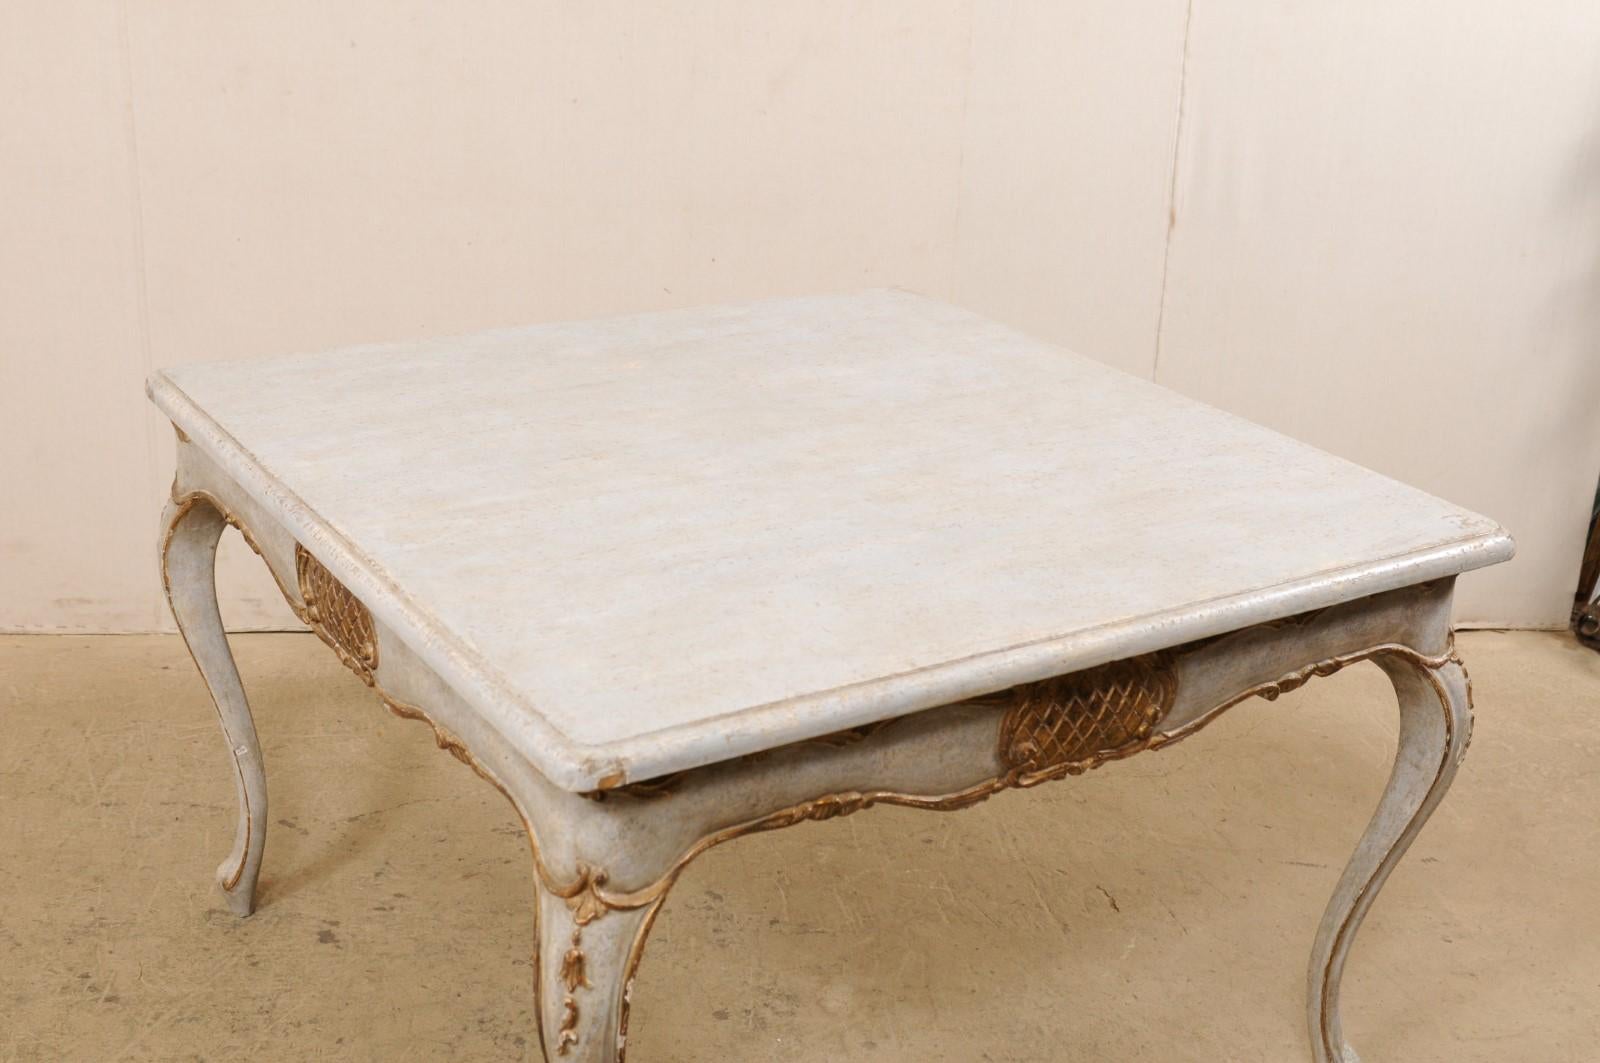 20th Century Italian Square-Shaped Wood Table w/ Elegant Legs, Scalloped Skirt & Gilt Accents For Sale